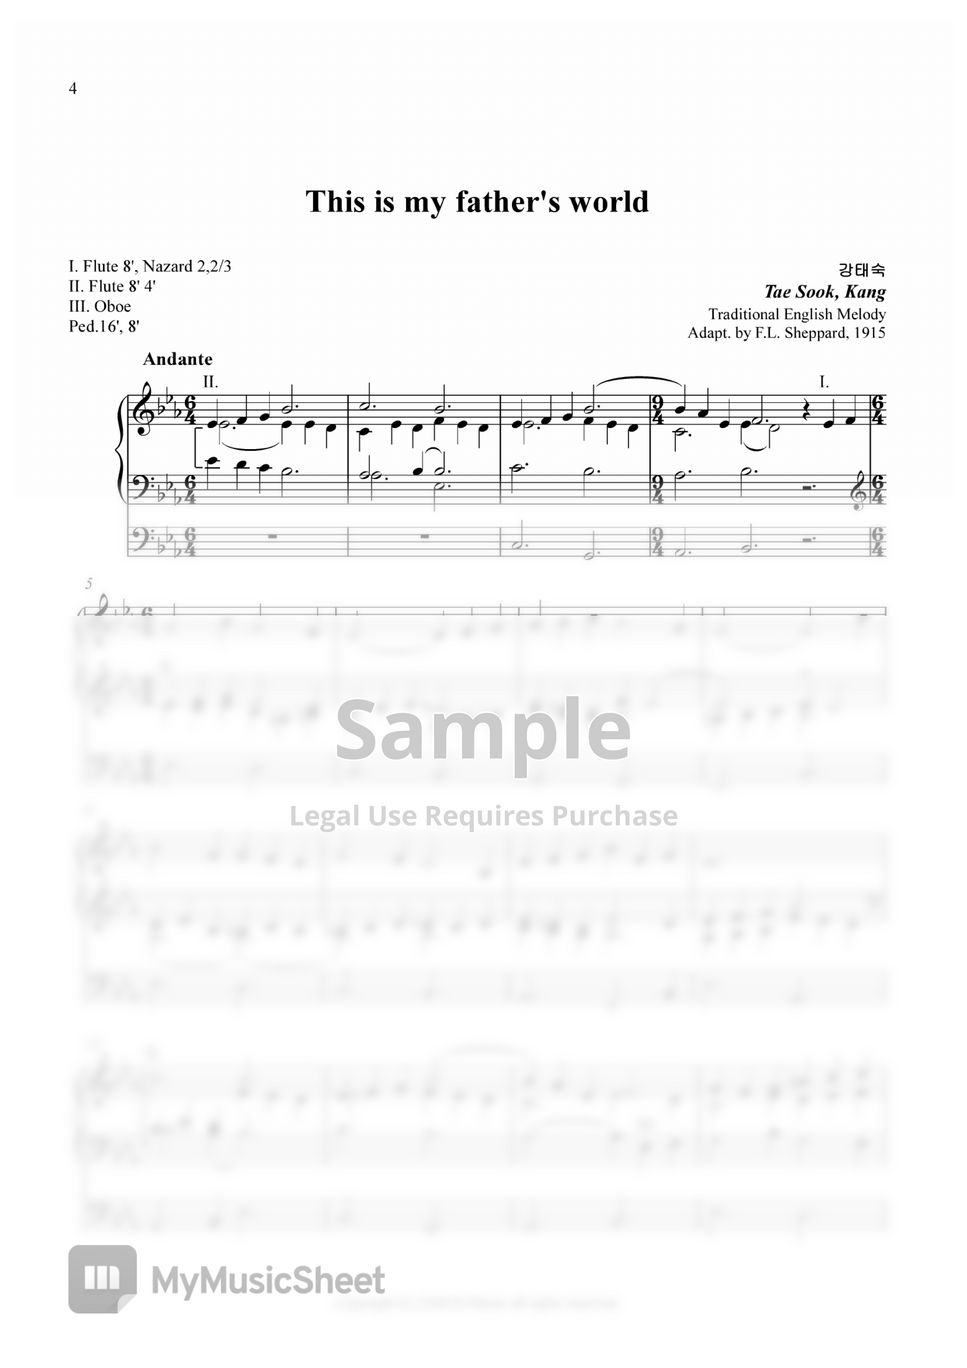 English tranditional melody - This is my father's world by TS-Kang